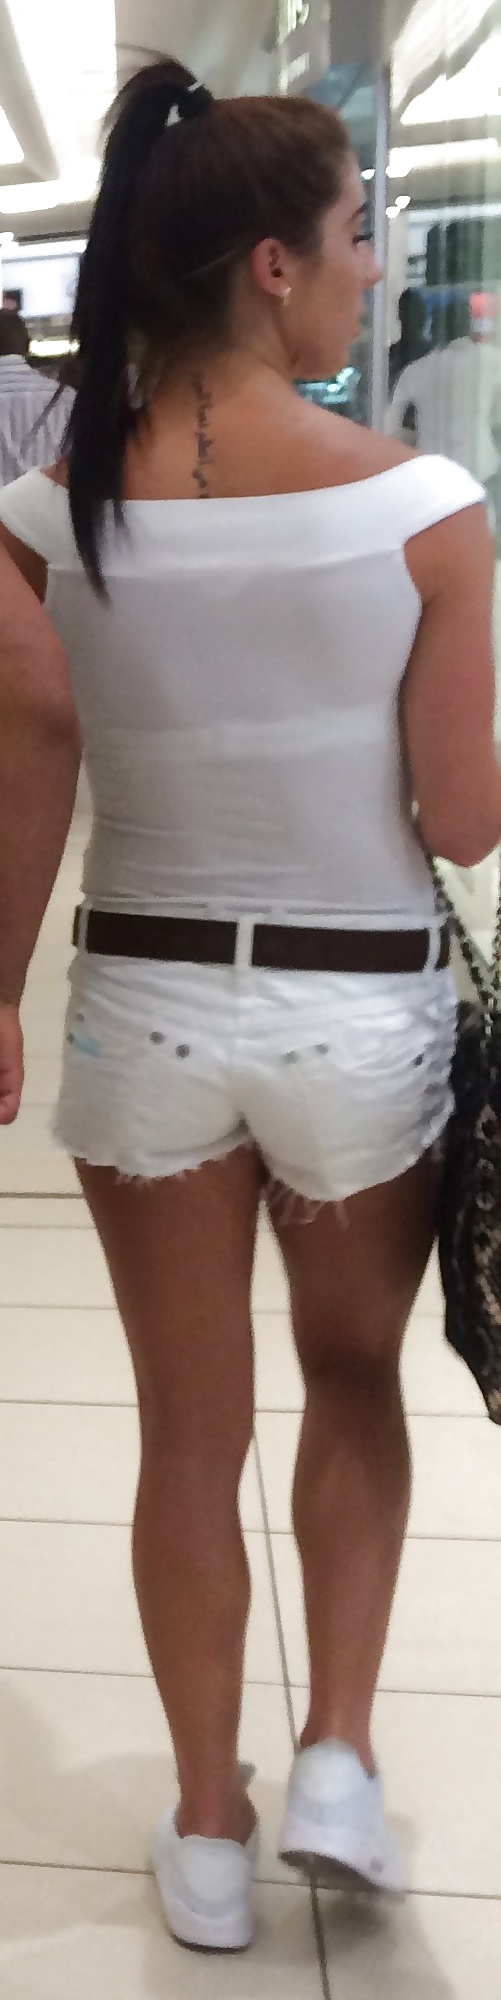 Tight tanned mall teen white shorts porn pictures